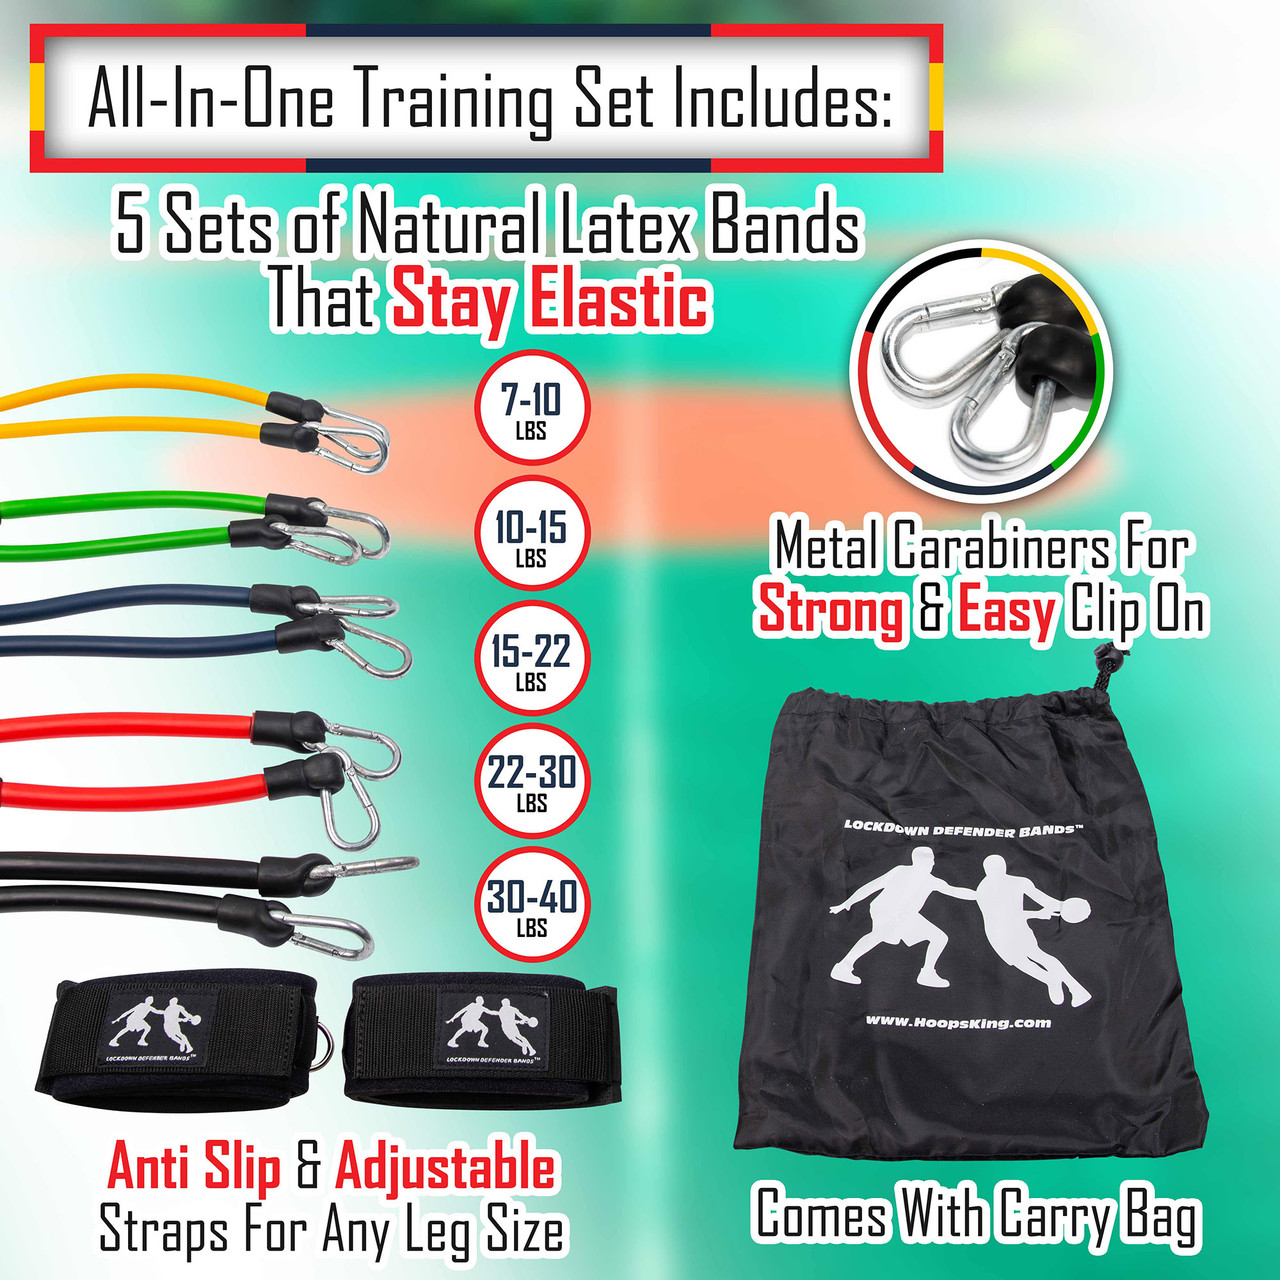 Free Carry Bag Included 2 Pk #1 Ankle Straps By Stronger